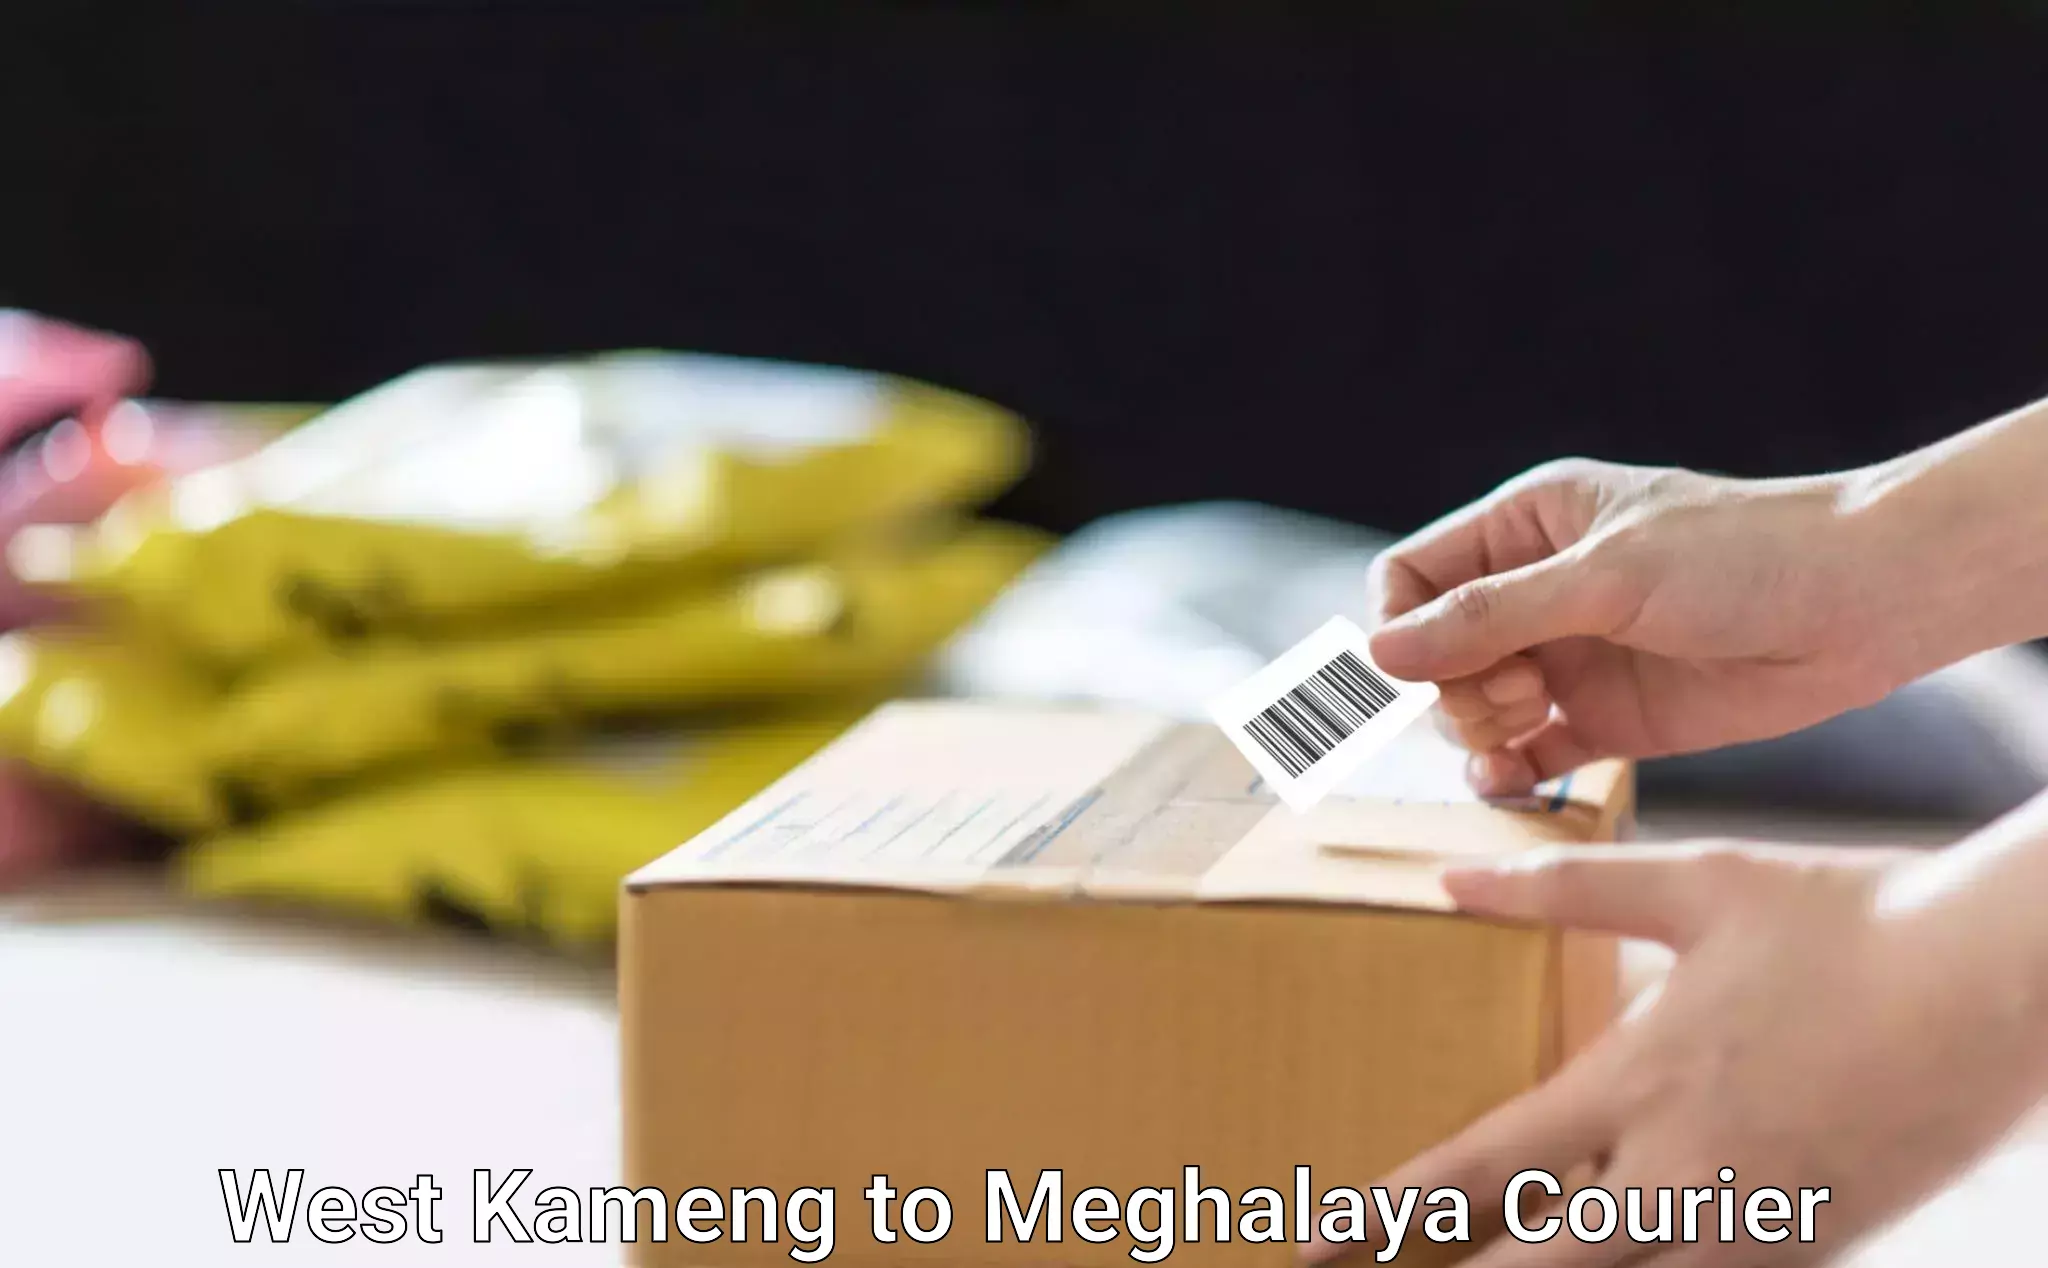 Courier service efficiency West Kameng to Meghalaya